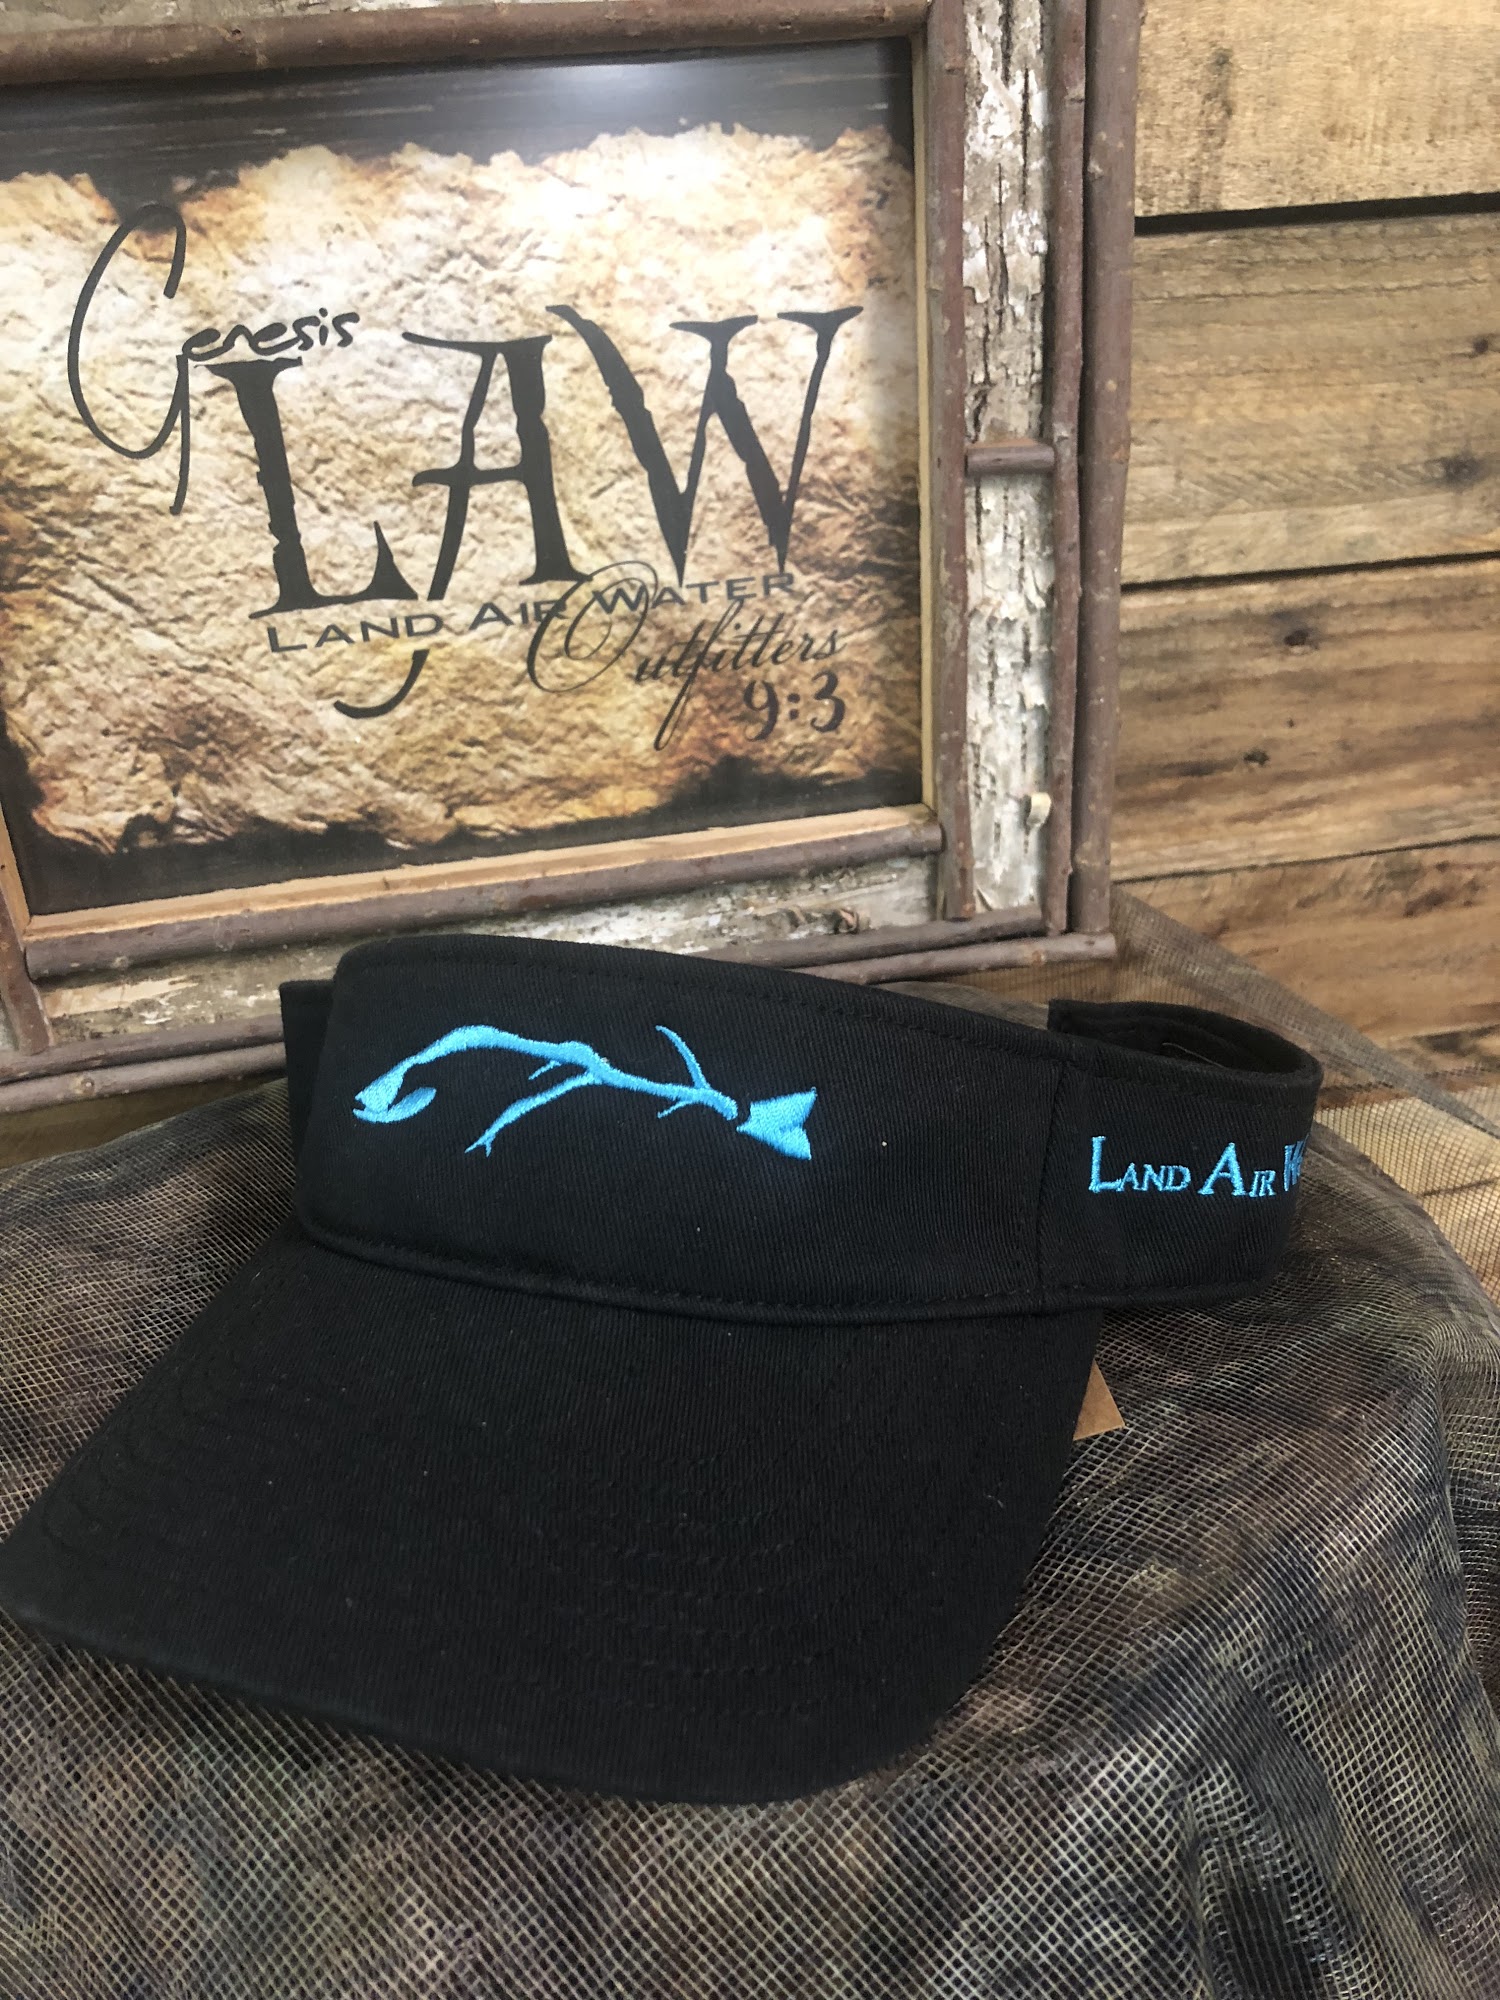 Genesis Law Outfitters